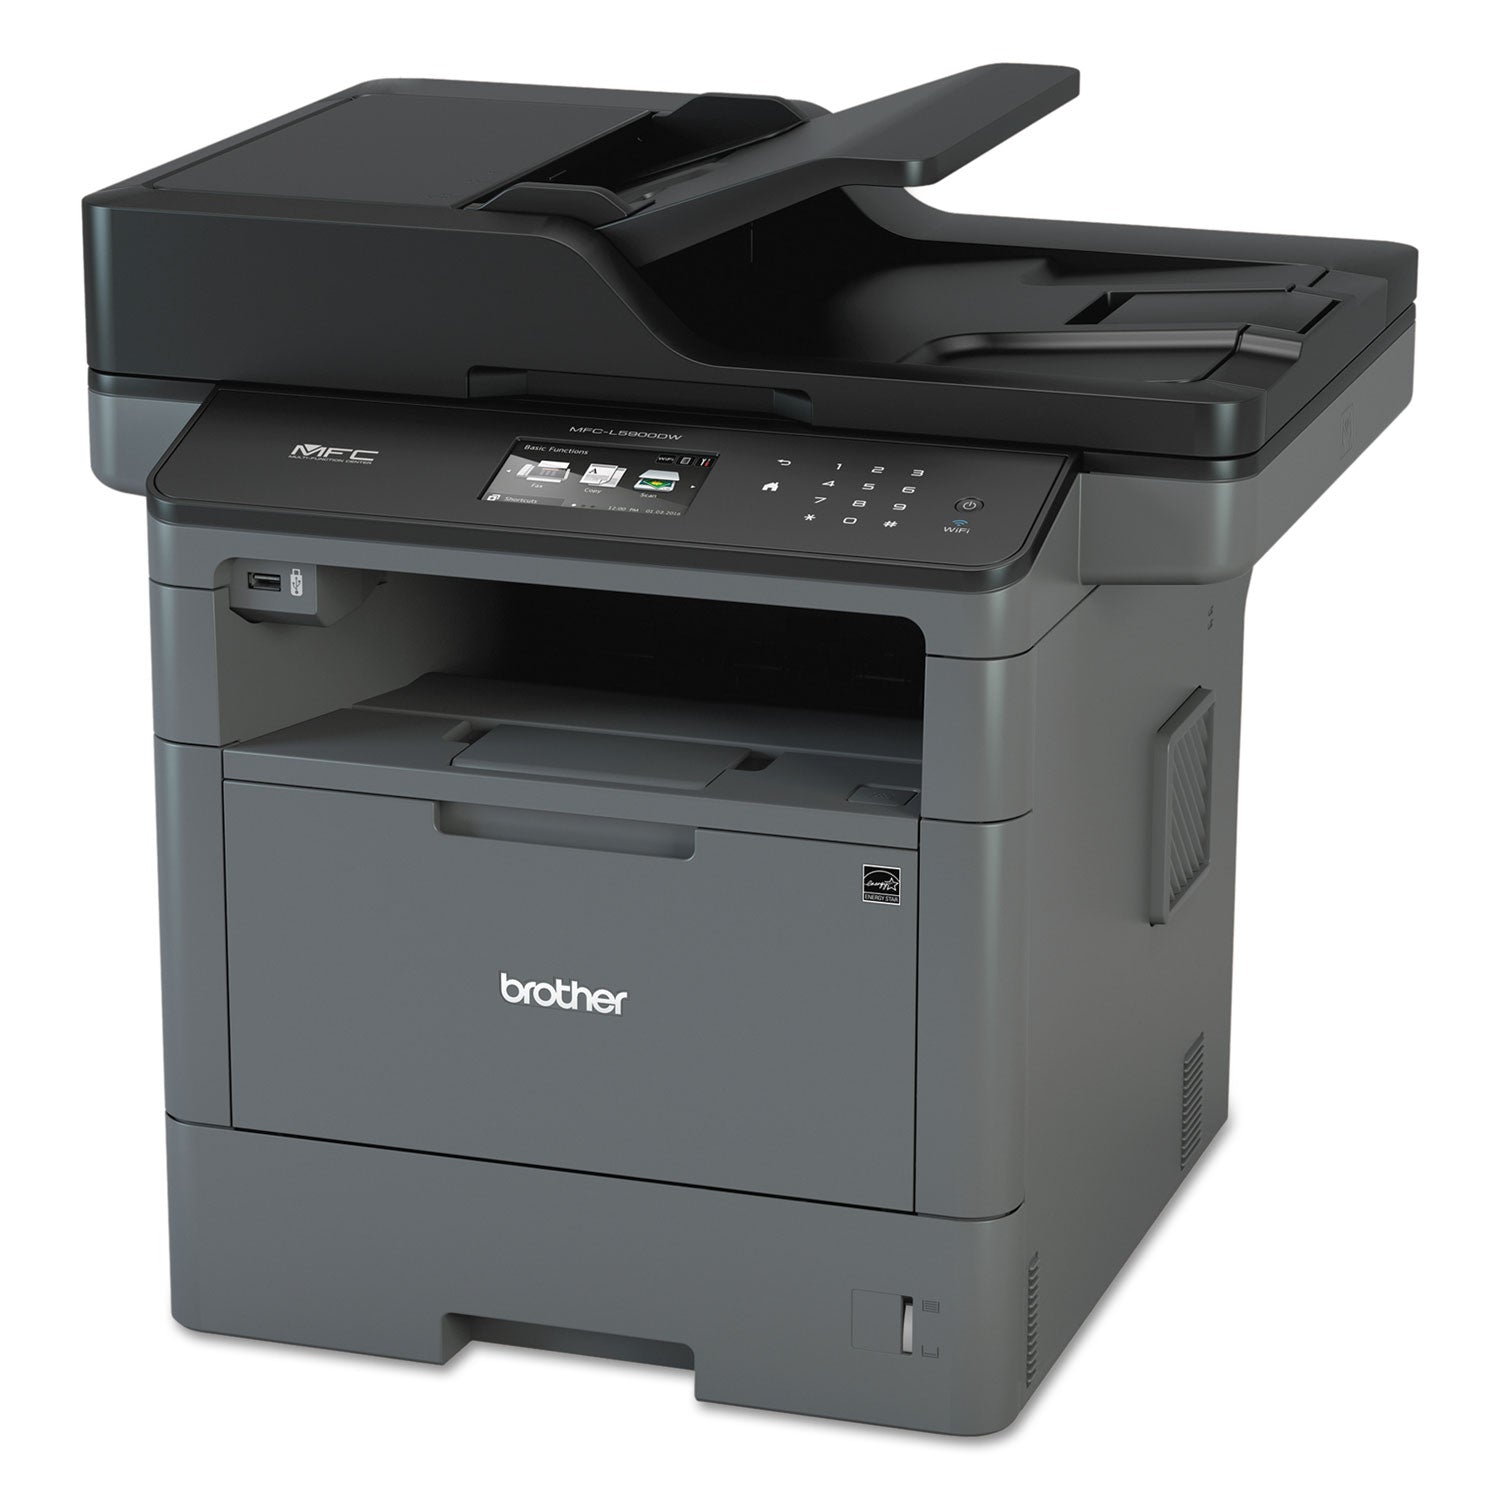 mfcl5900dw-business-laser-all-in-one-printer-with-duplex-print-scan-and-copy-wireless-networking_brtmfcl5900dw - 2